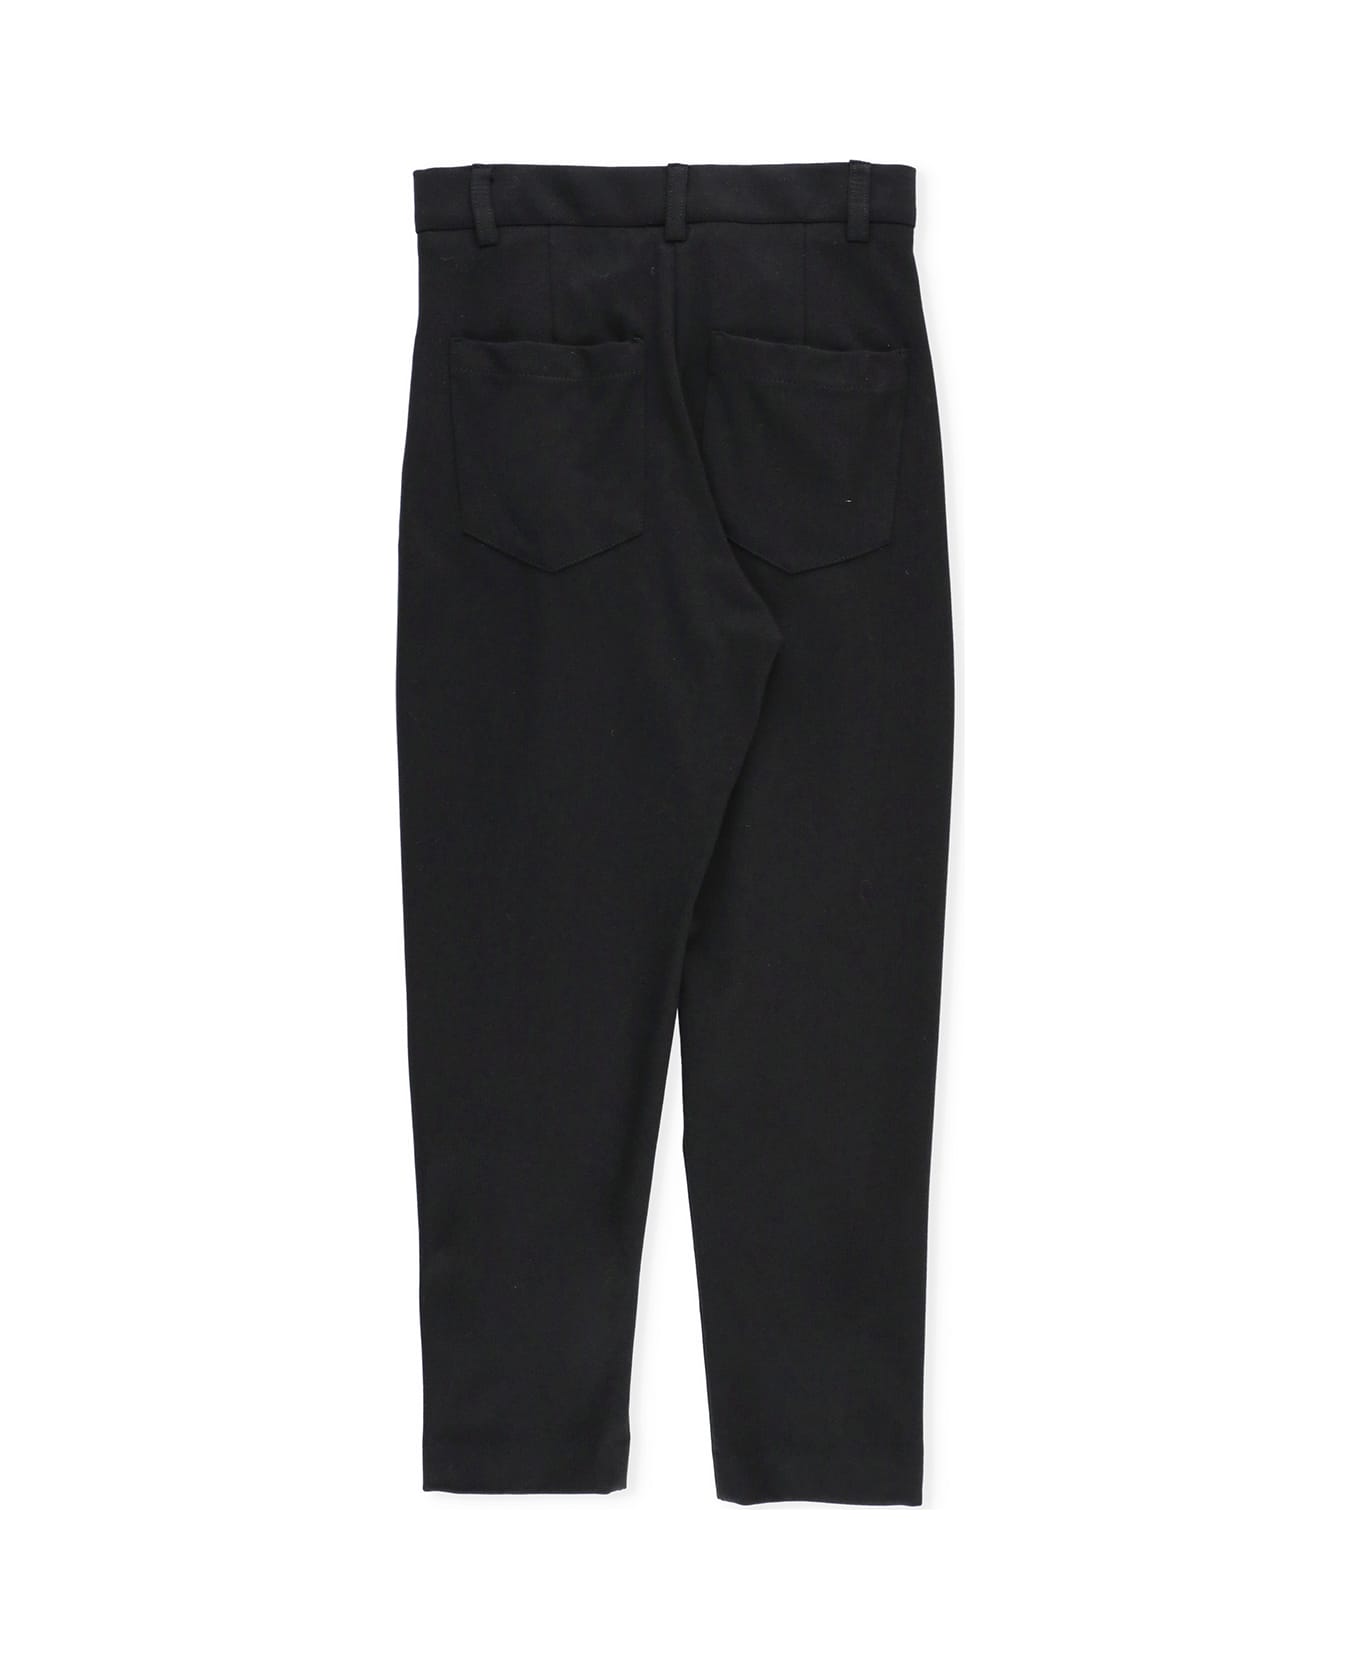 Balmain Pants With Loged Buttons - Black ボトムス